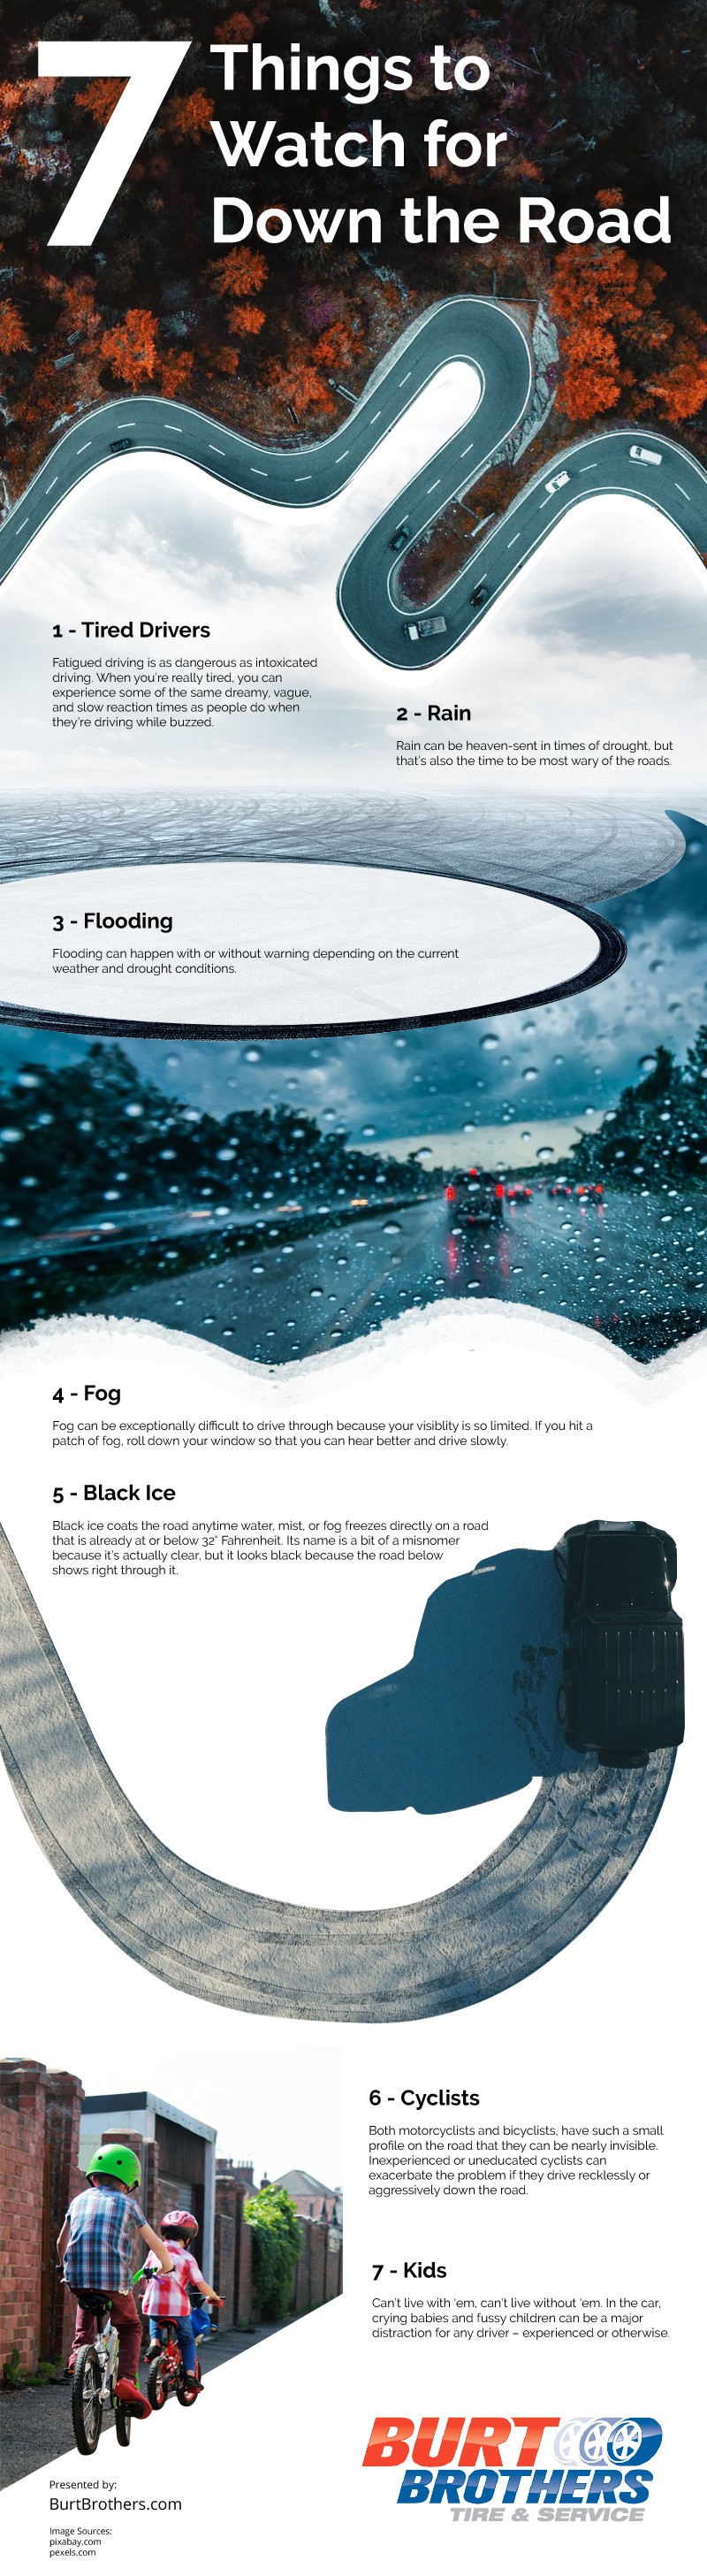 7 Things to Watch for Down the Road Infographic